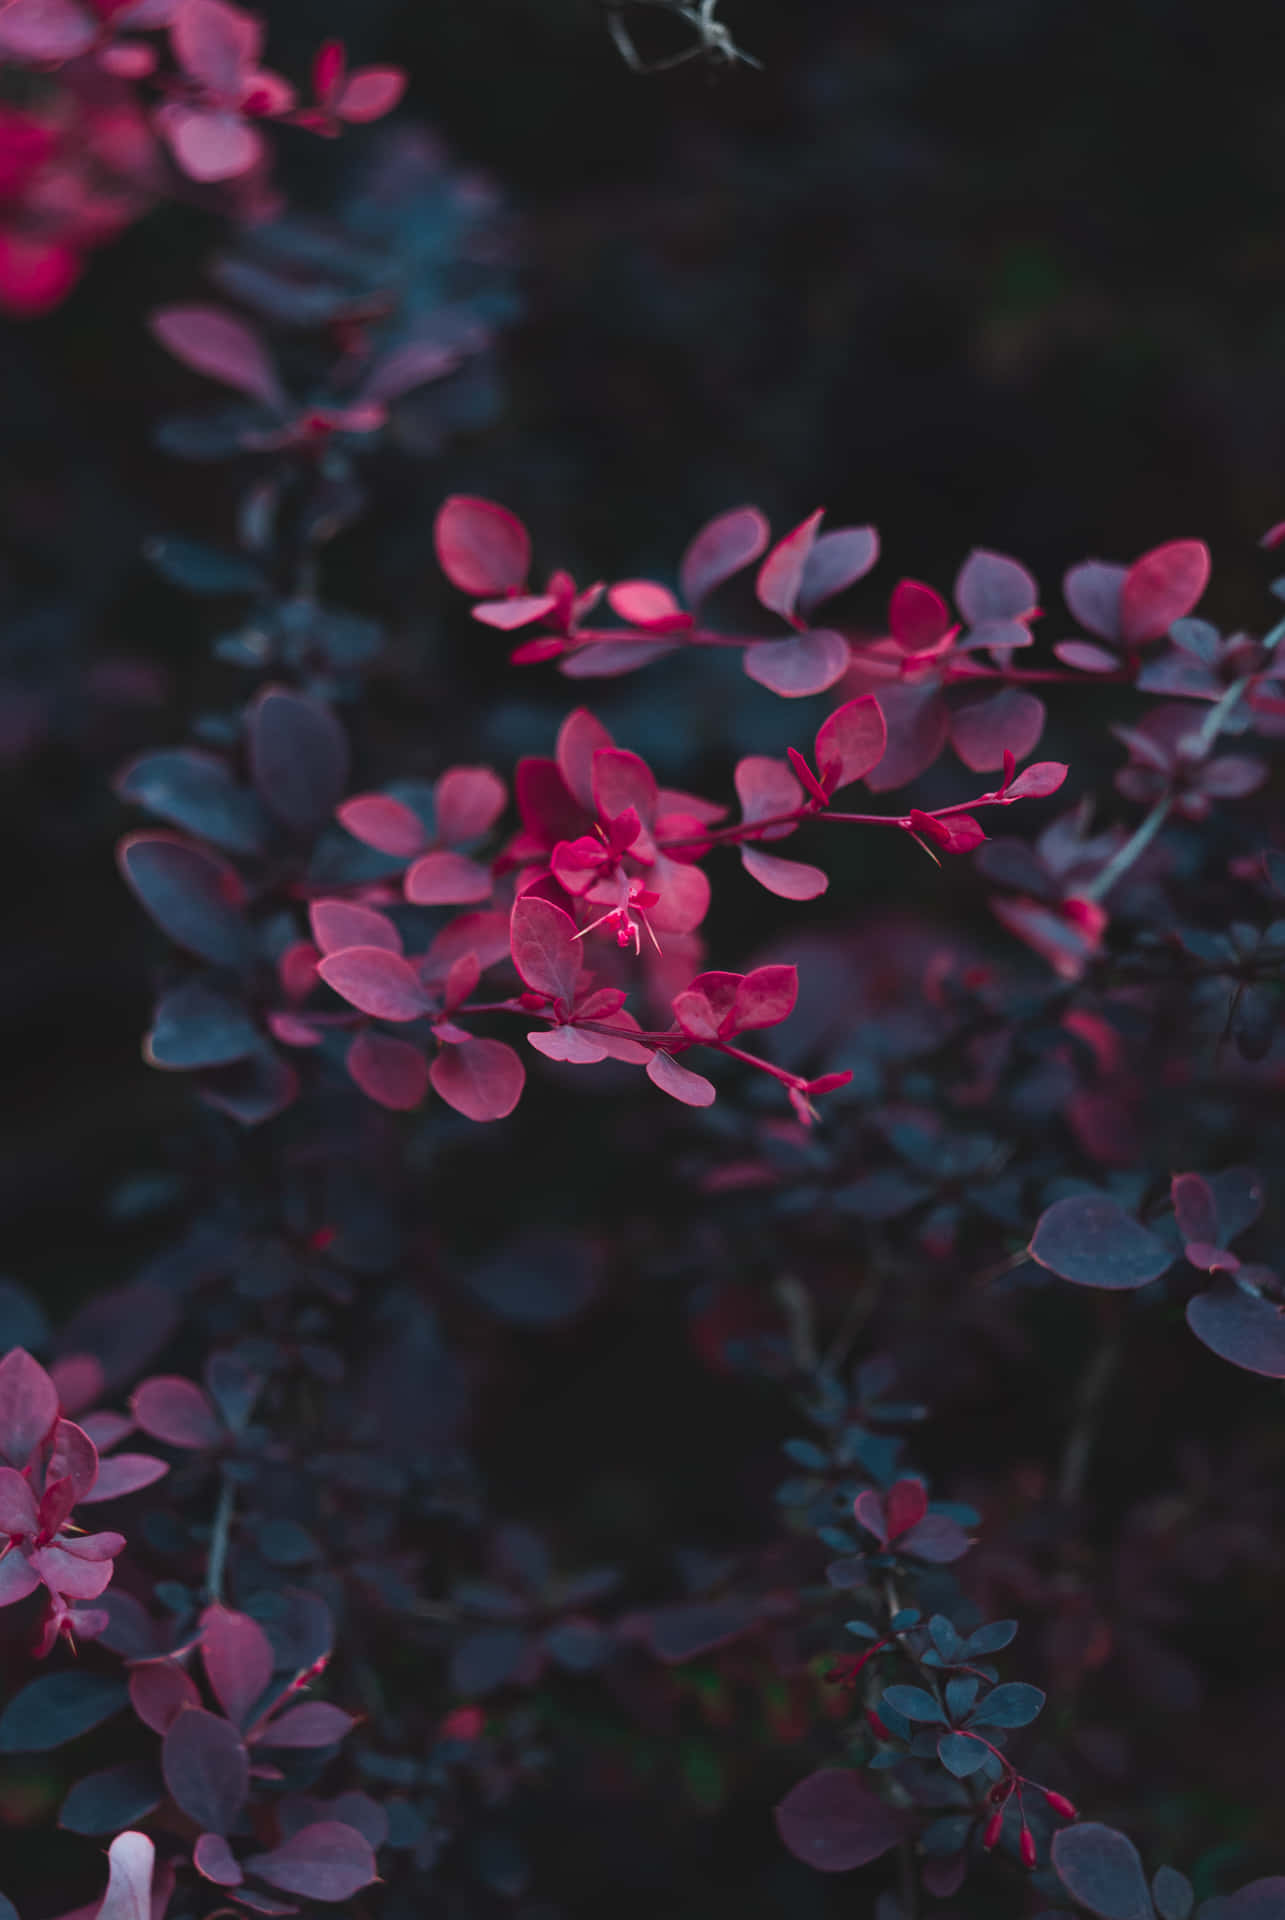 Aesthetic Red Flowers With Dark Leaves Wallpaper